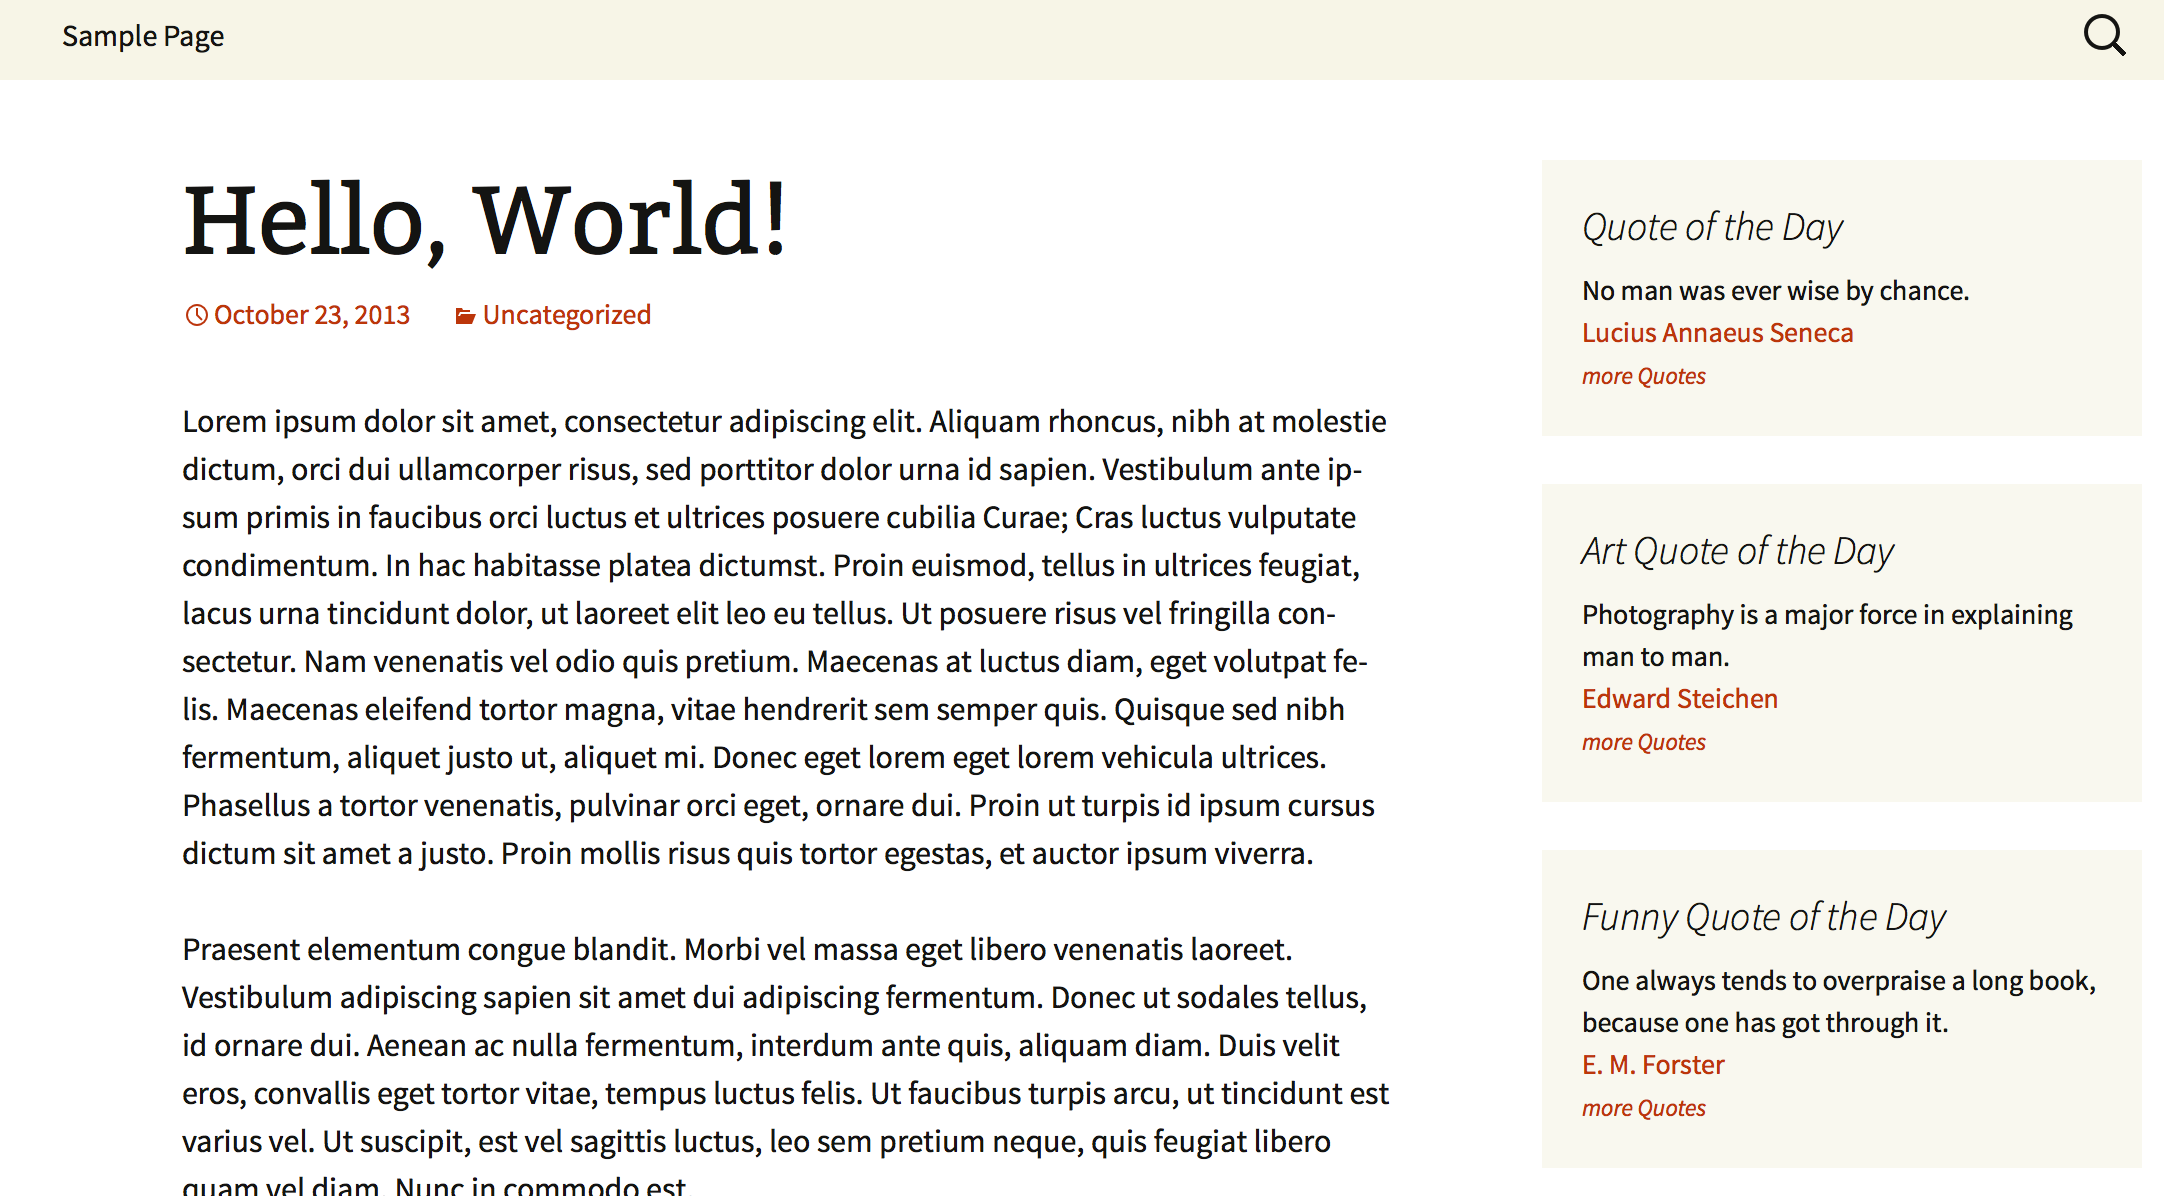 Screenshot of the wordpress page with multiple Quote Of The Day widgets.